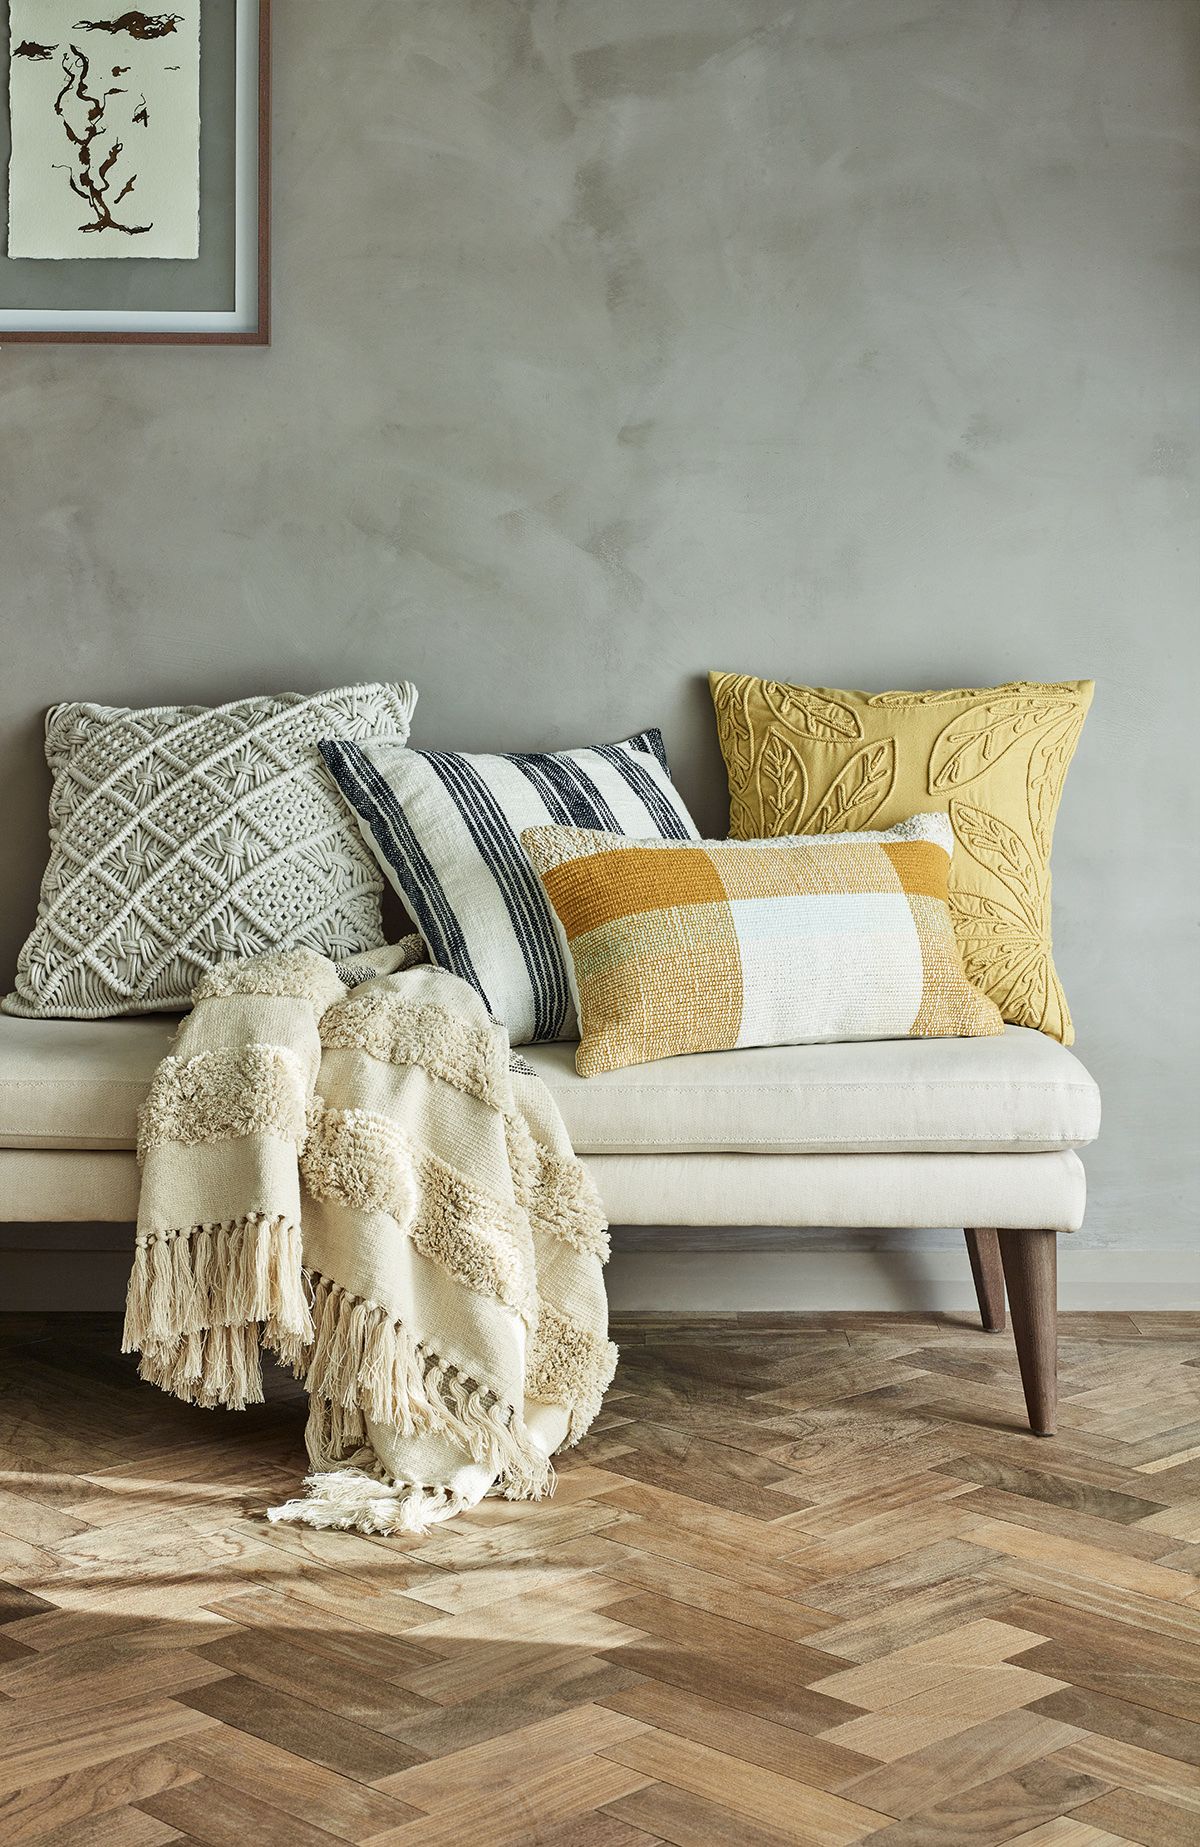 https://asset1.marksandspencer.com/is/image/mands/SOFTS_CUSHIONS_OUTDOOR_SUM22?wid=1200